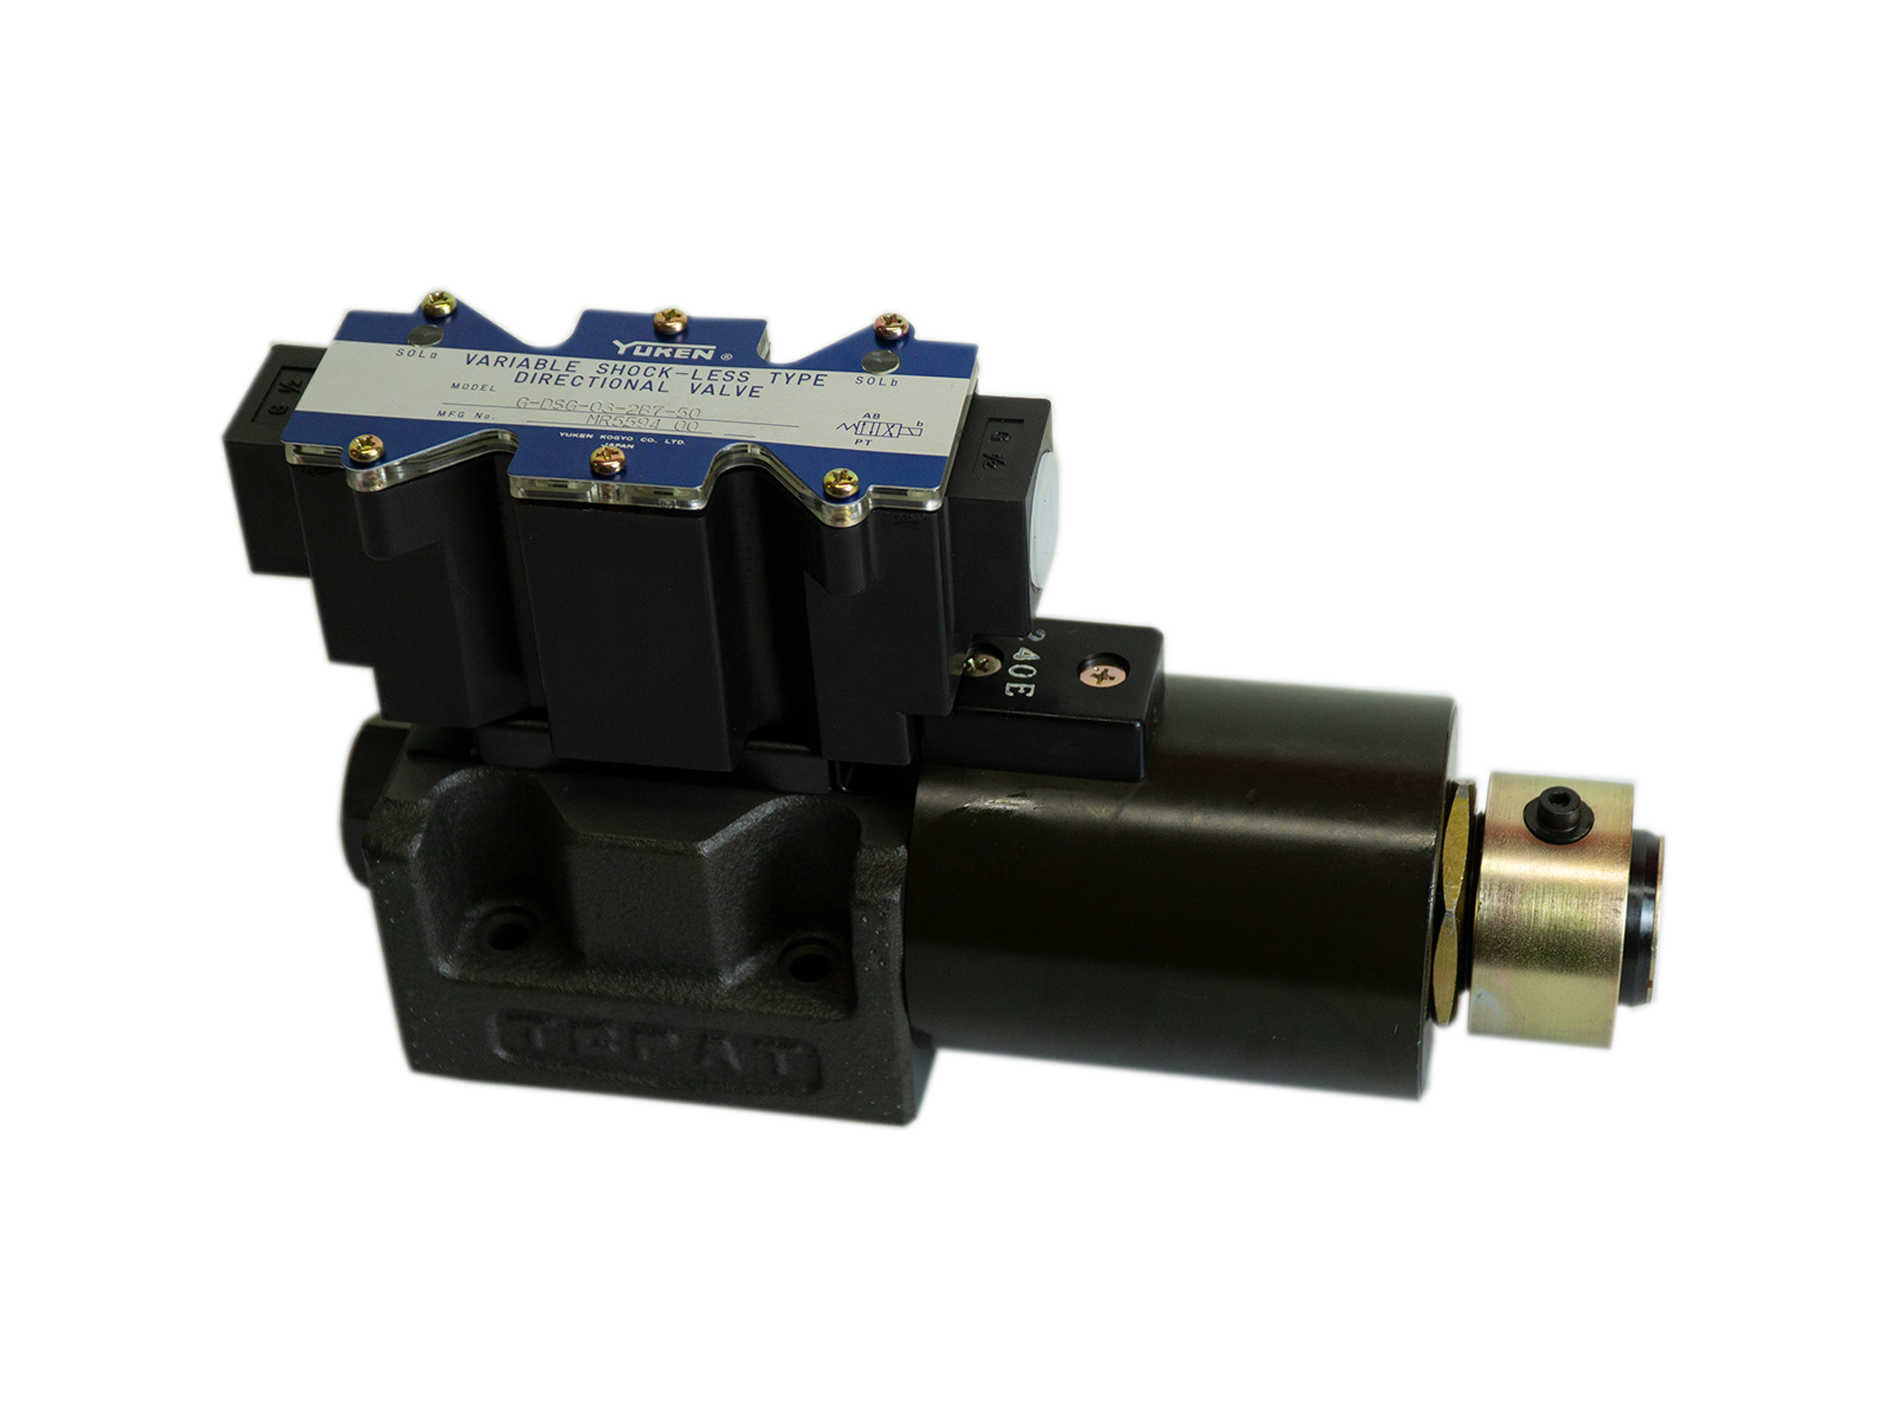 Pilot Operated Electronic Shockless Control Valve - Cetop 7 | Hydraulic specialists